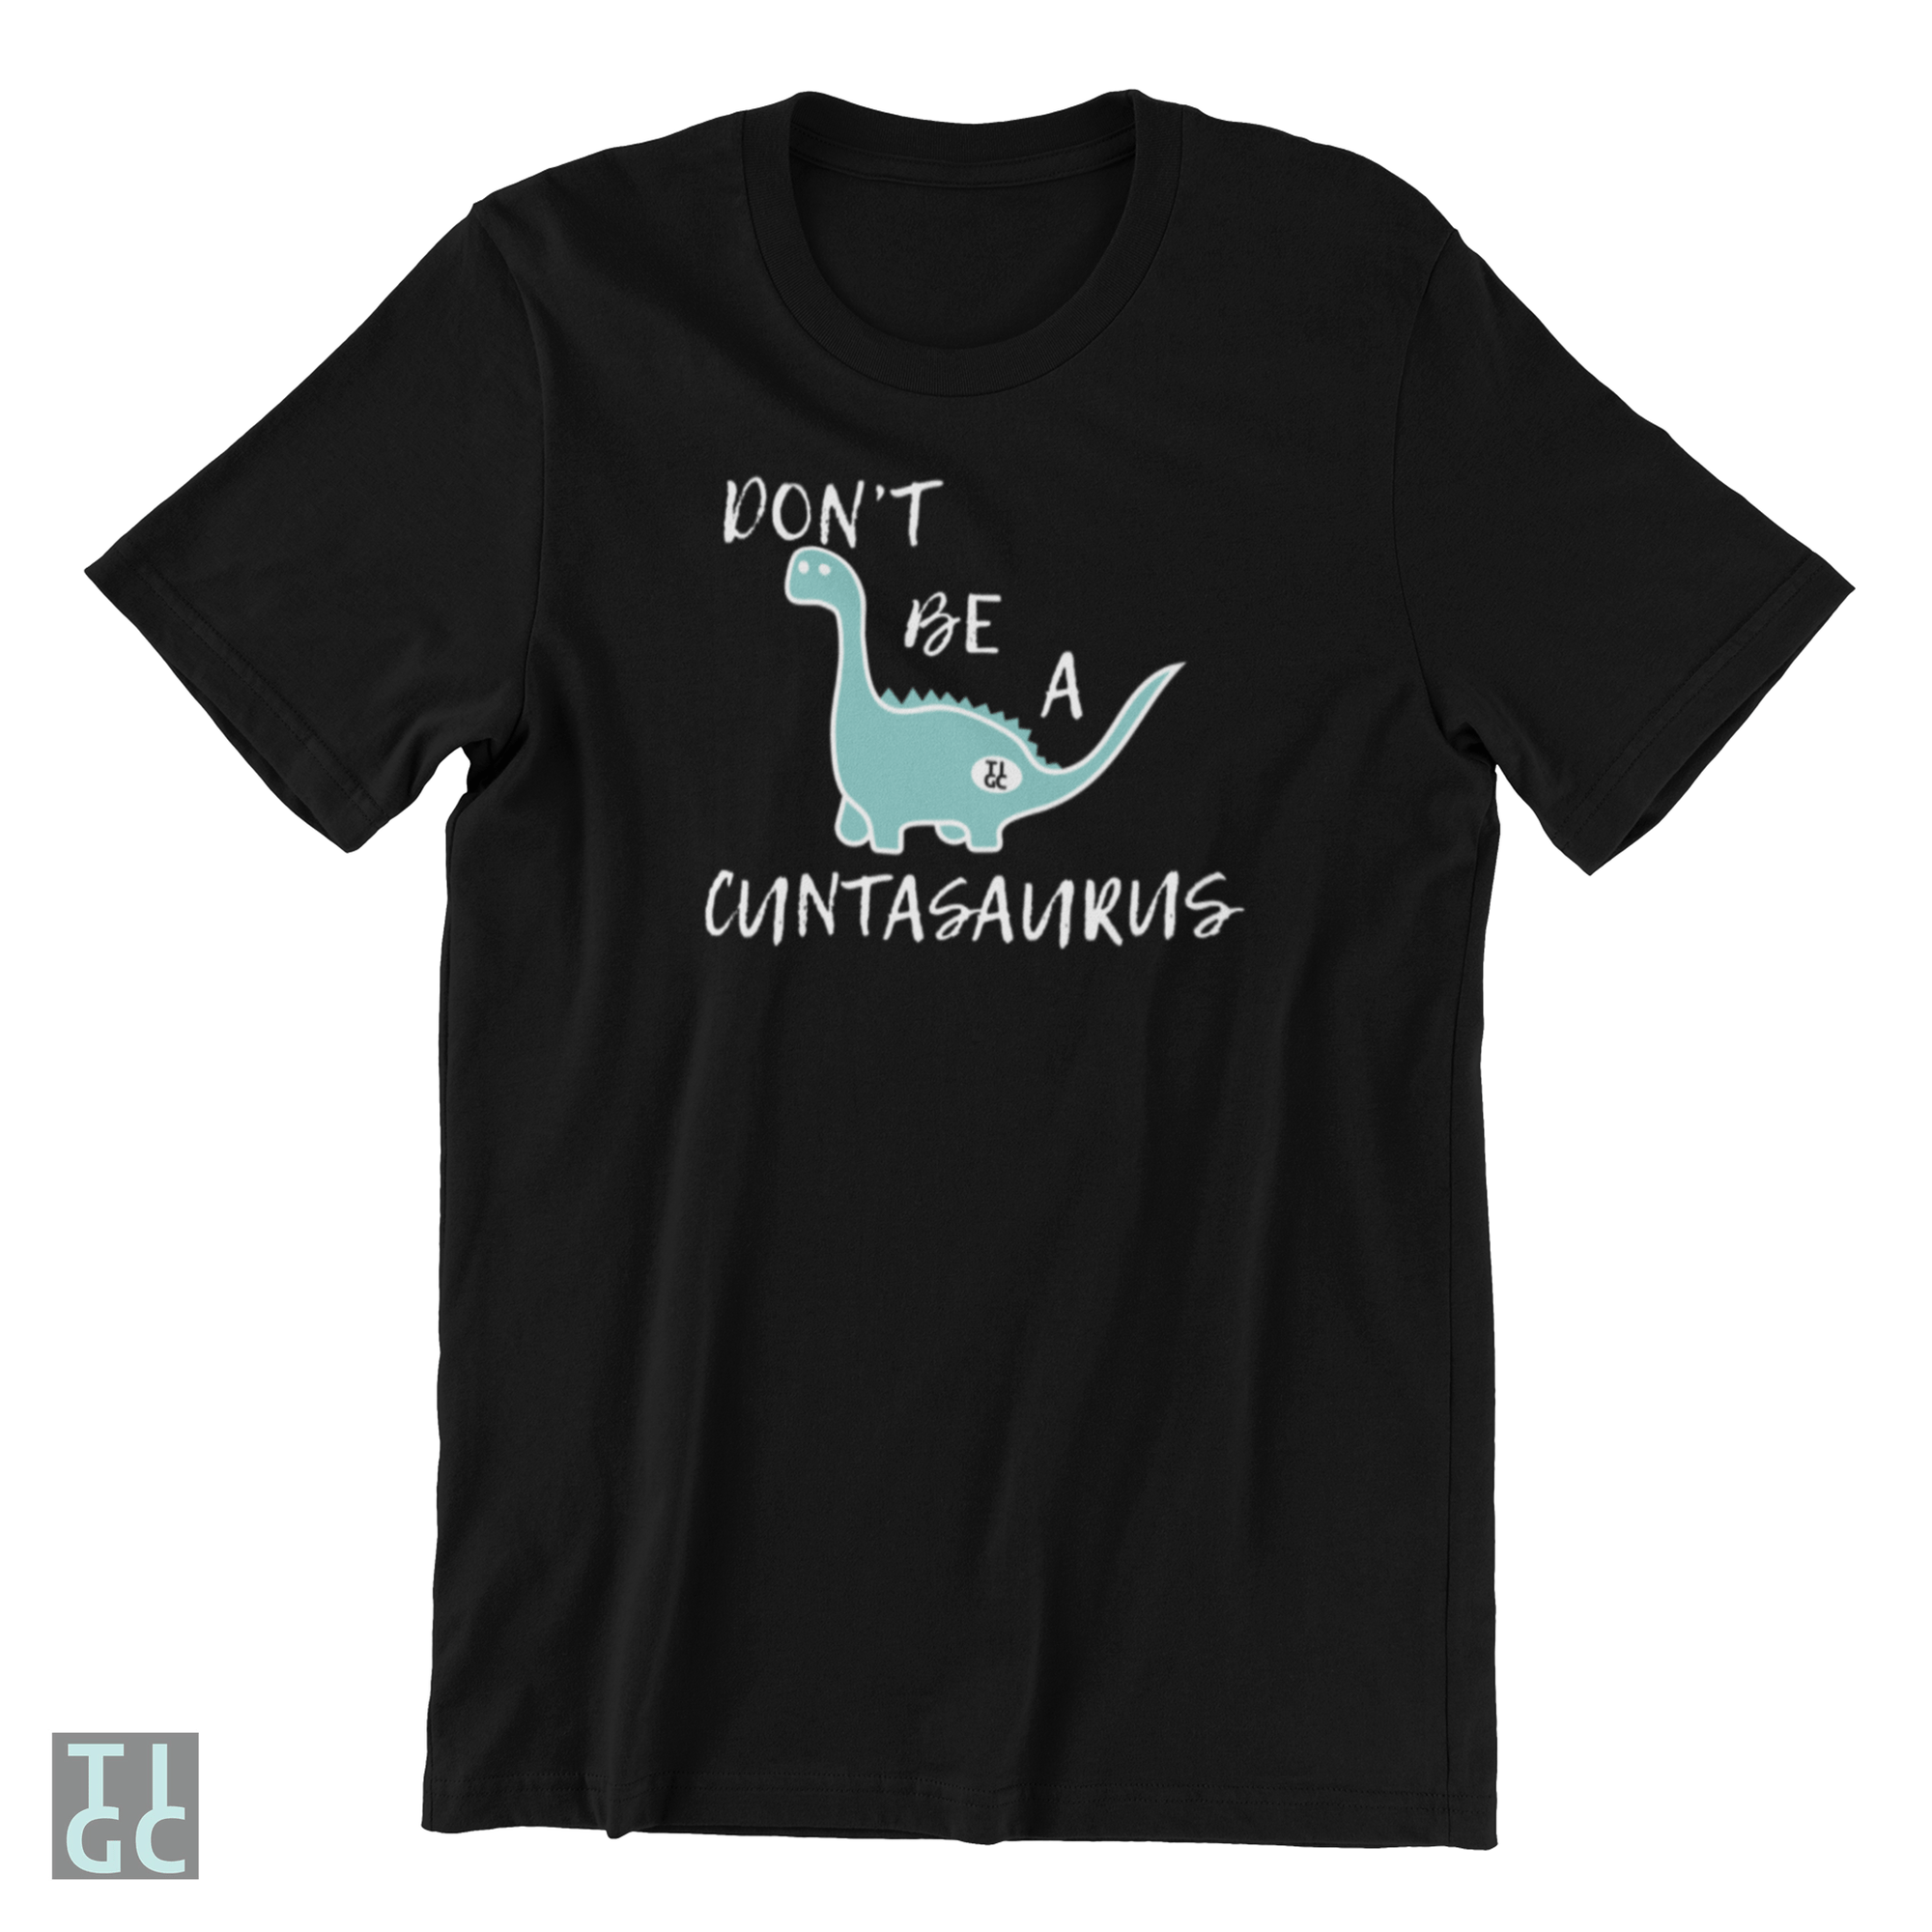 TIGC The Inappropriate Gift Co Cuntasaurus t-shirt